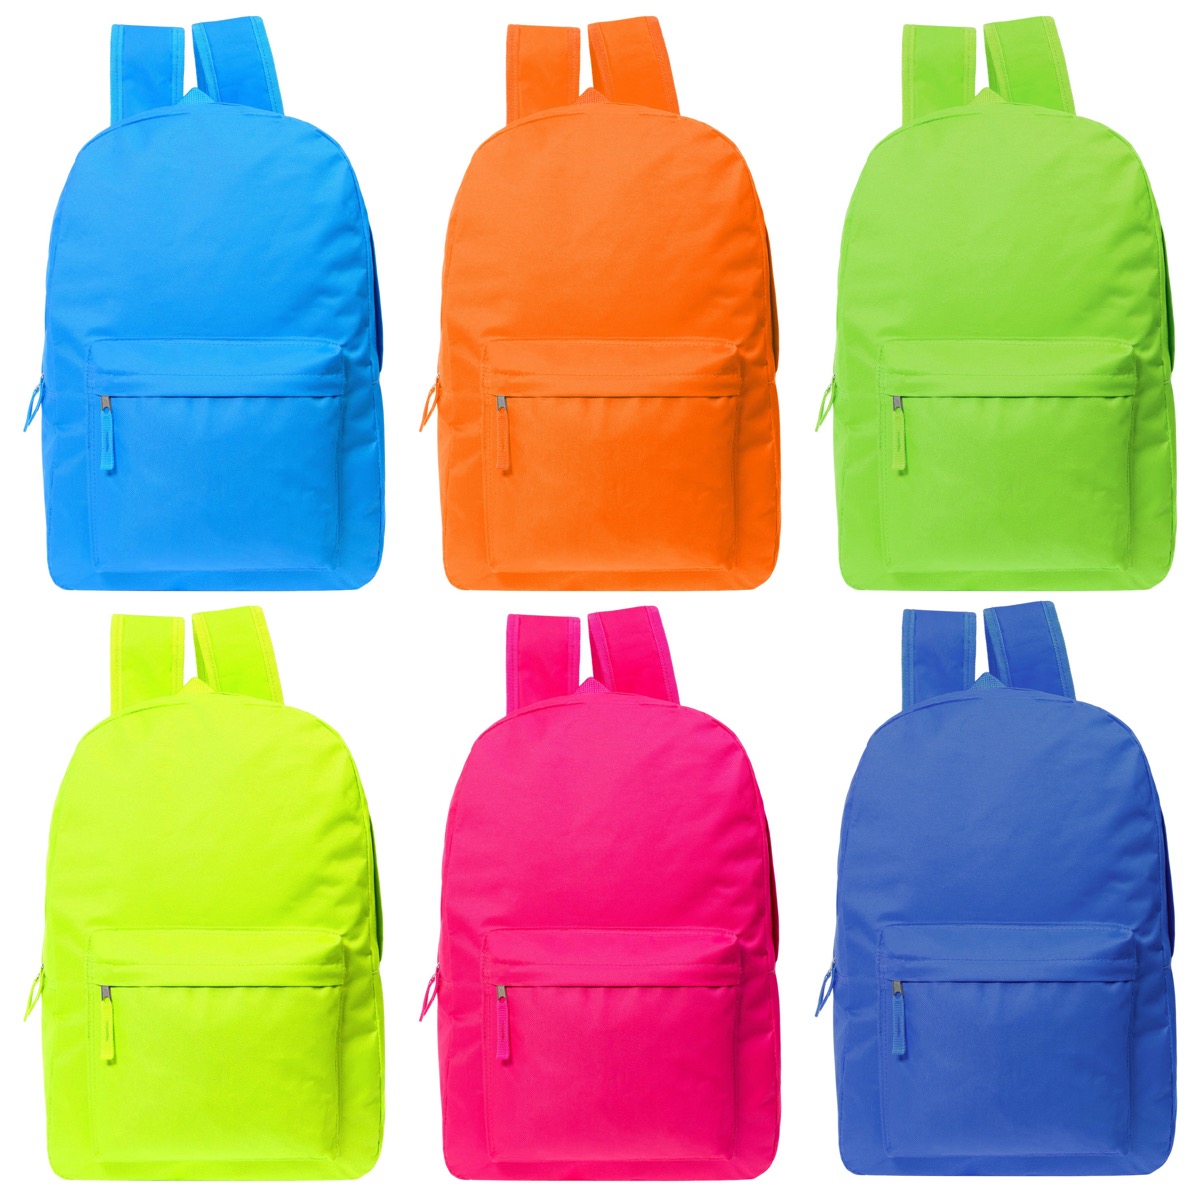 ''17'''' Children's Lightweight Classic Style BACKPACKs - Neon Colors''